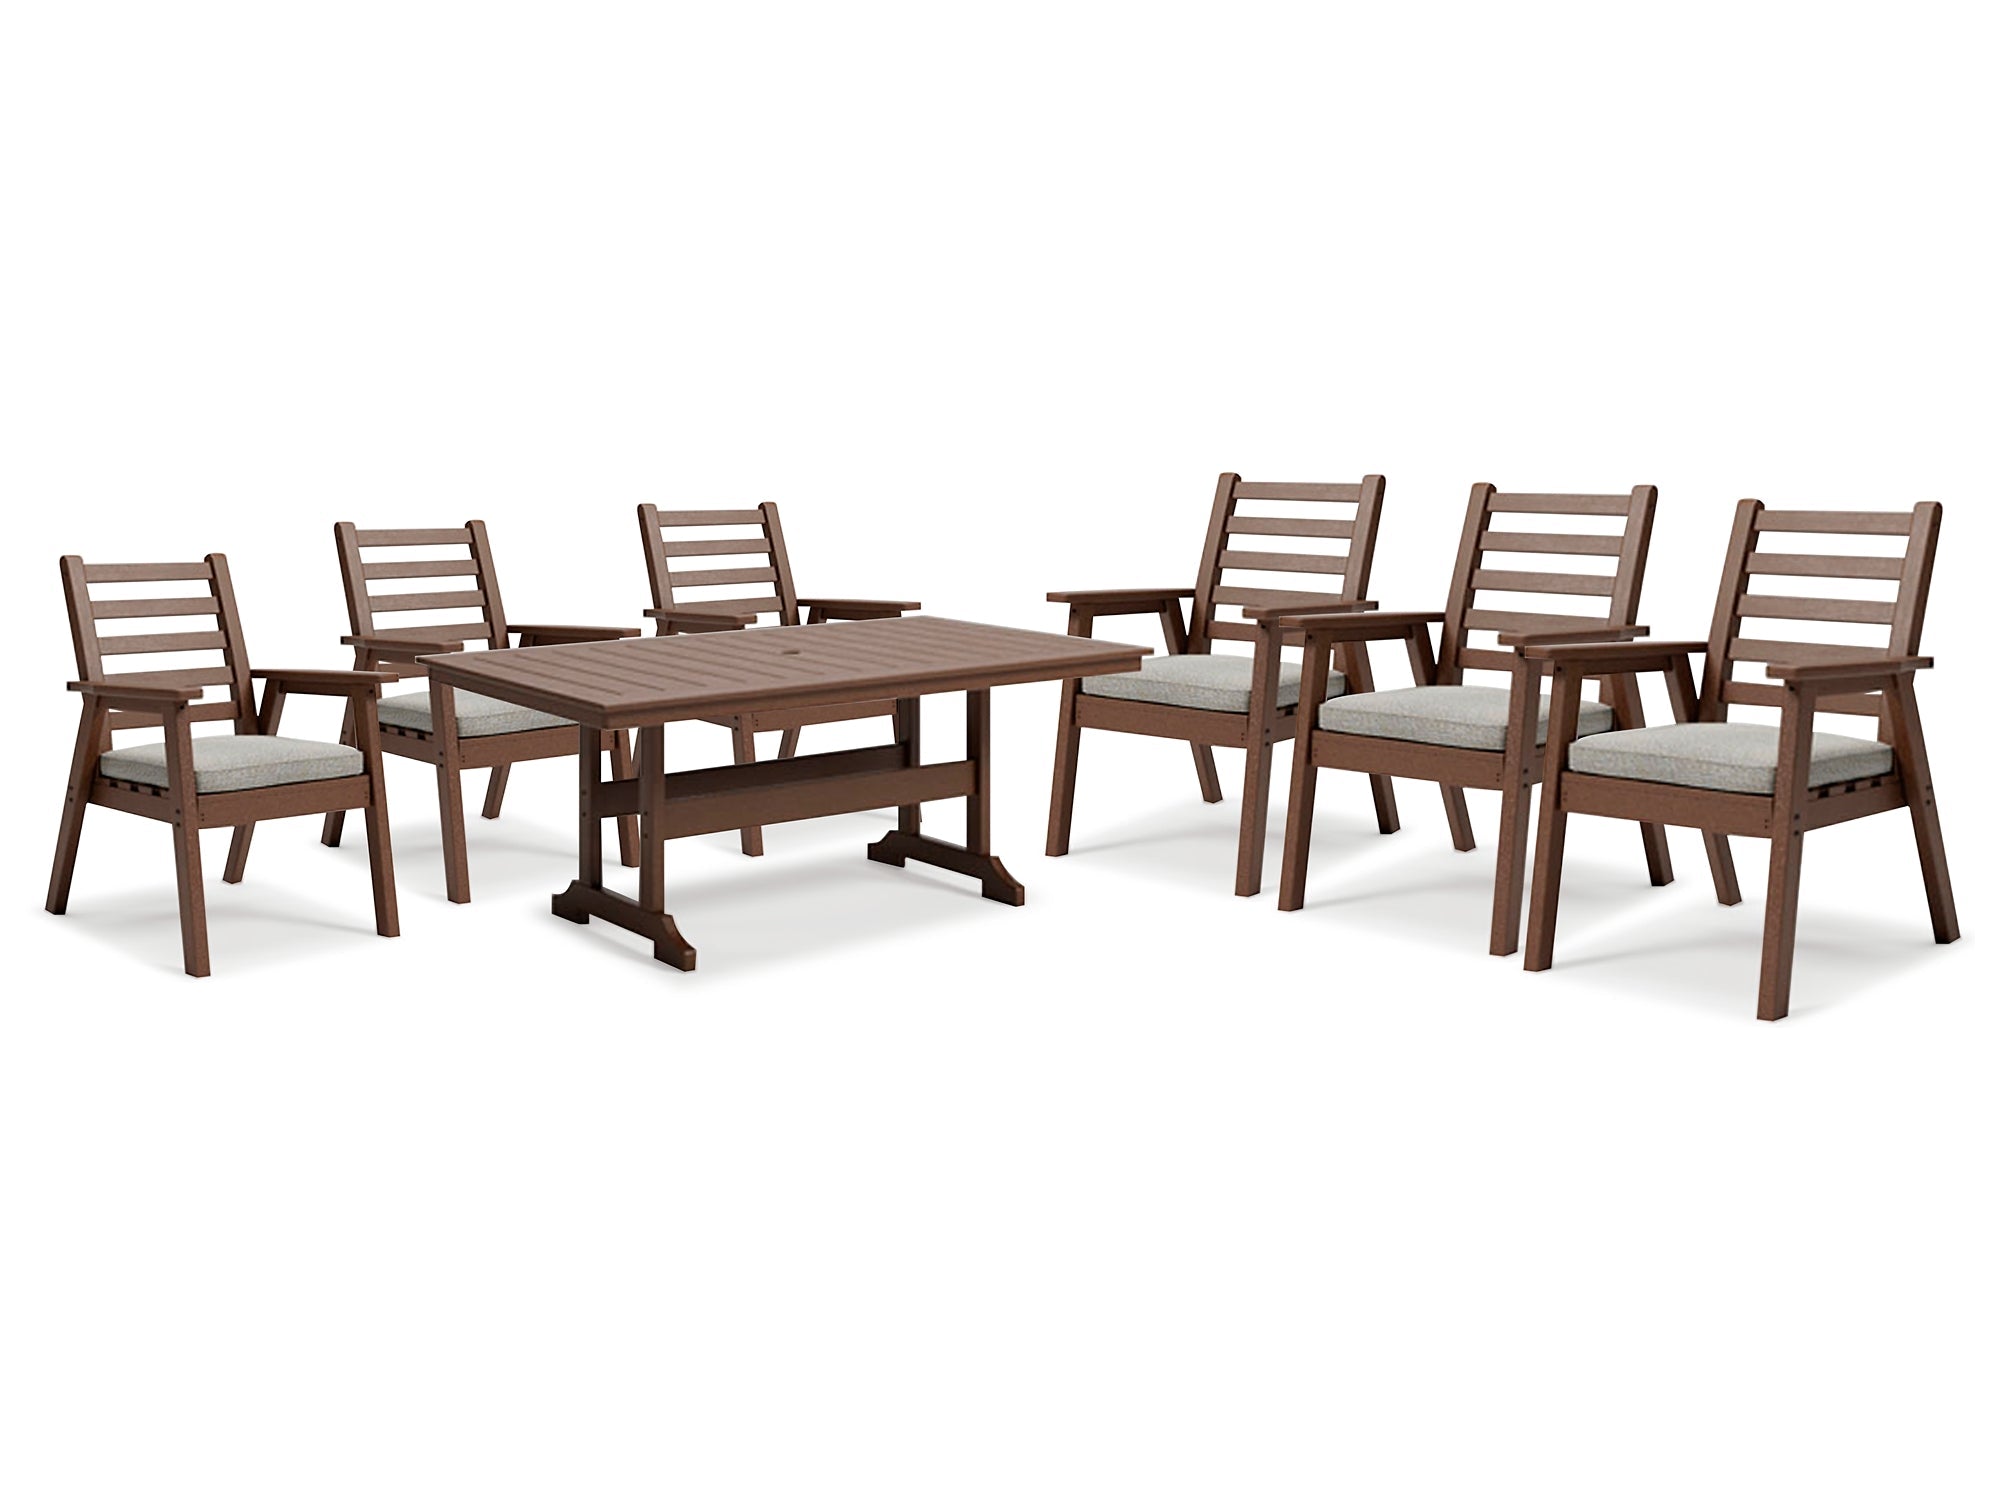 Emmeline Outdoor Dining Table and 6 Chairs